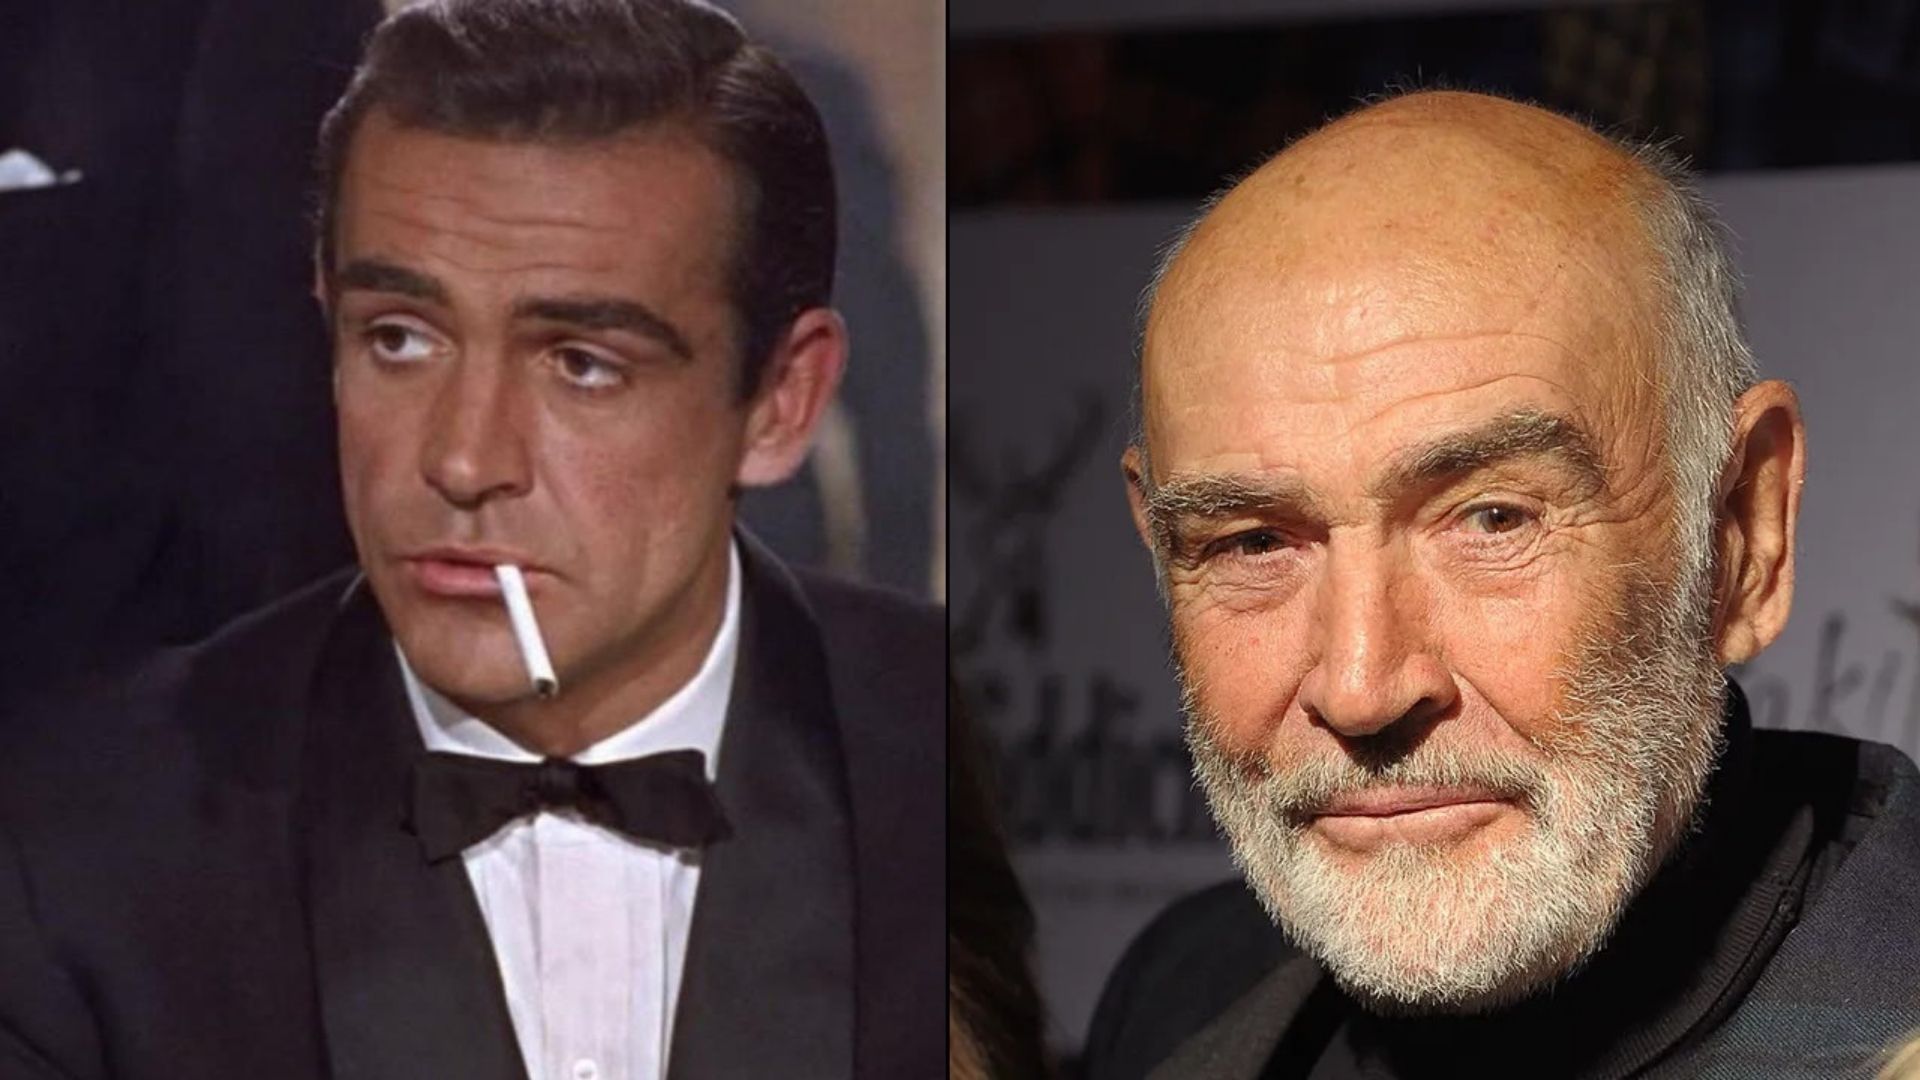 A collage of Sean Connery as James Bond (left) and in his old age (right)